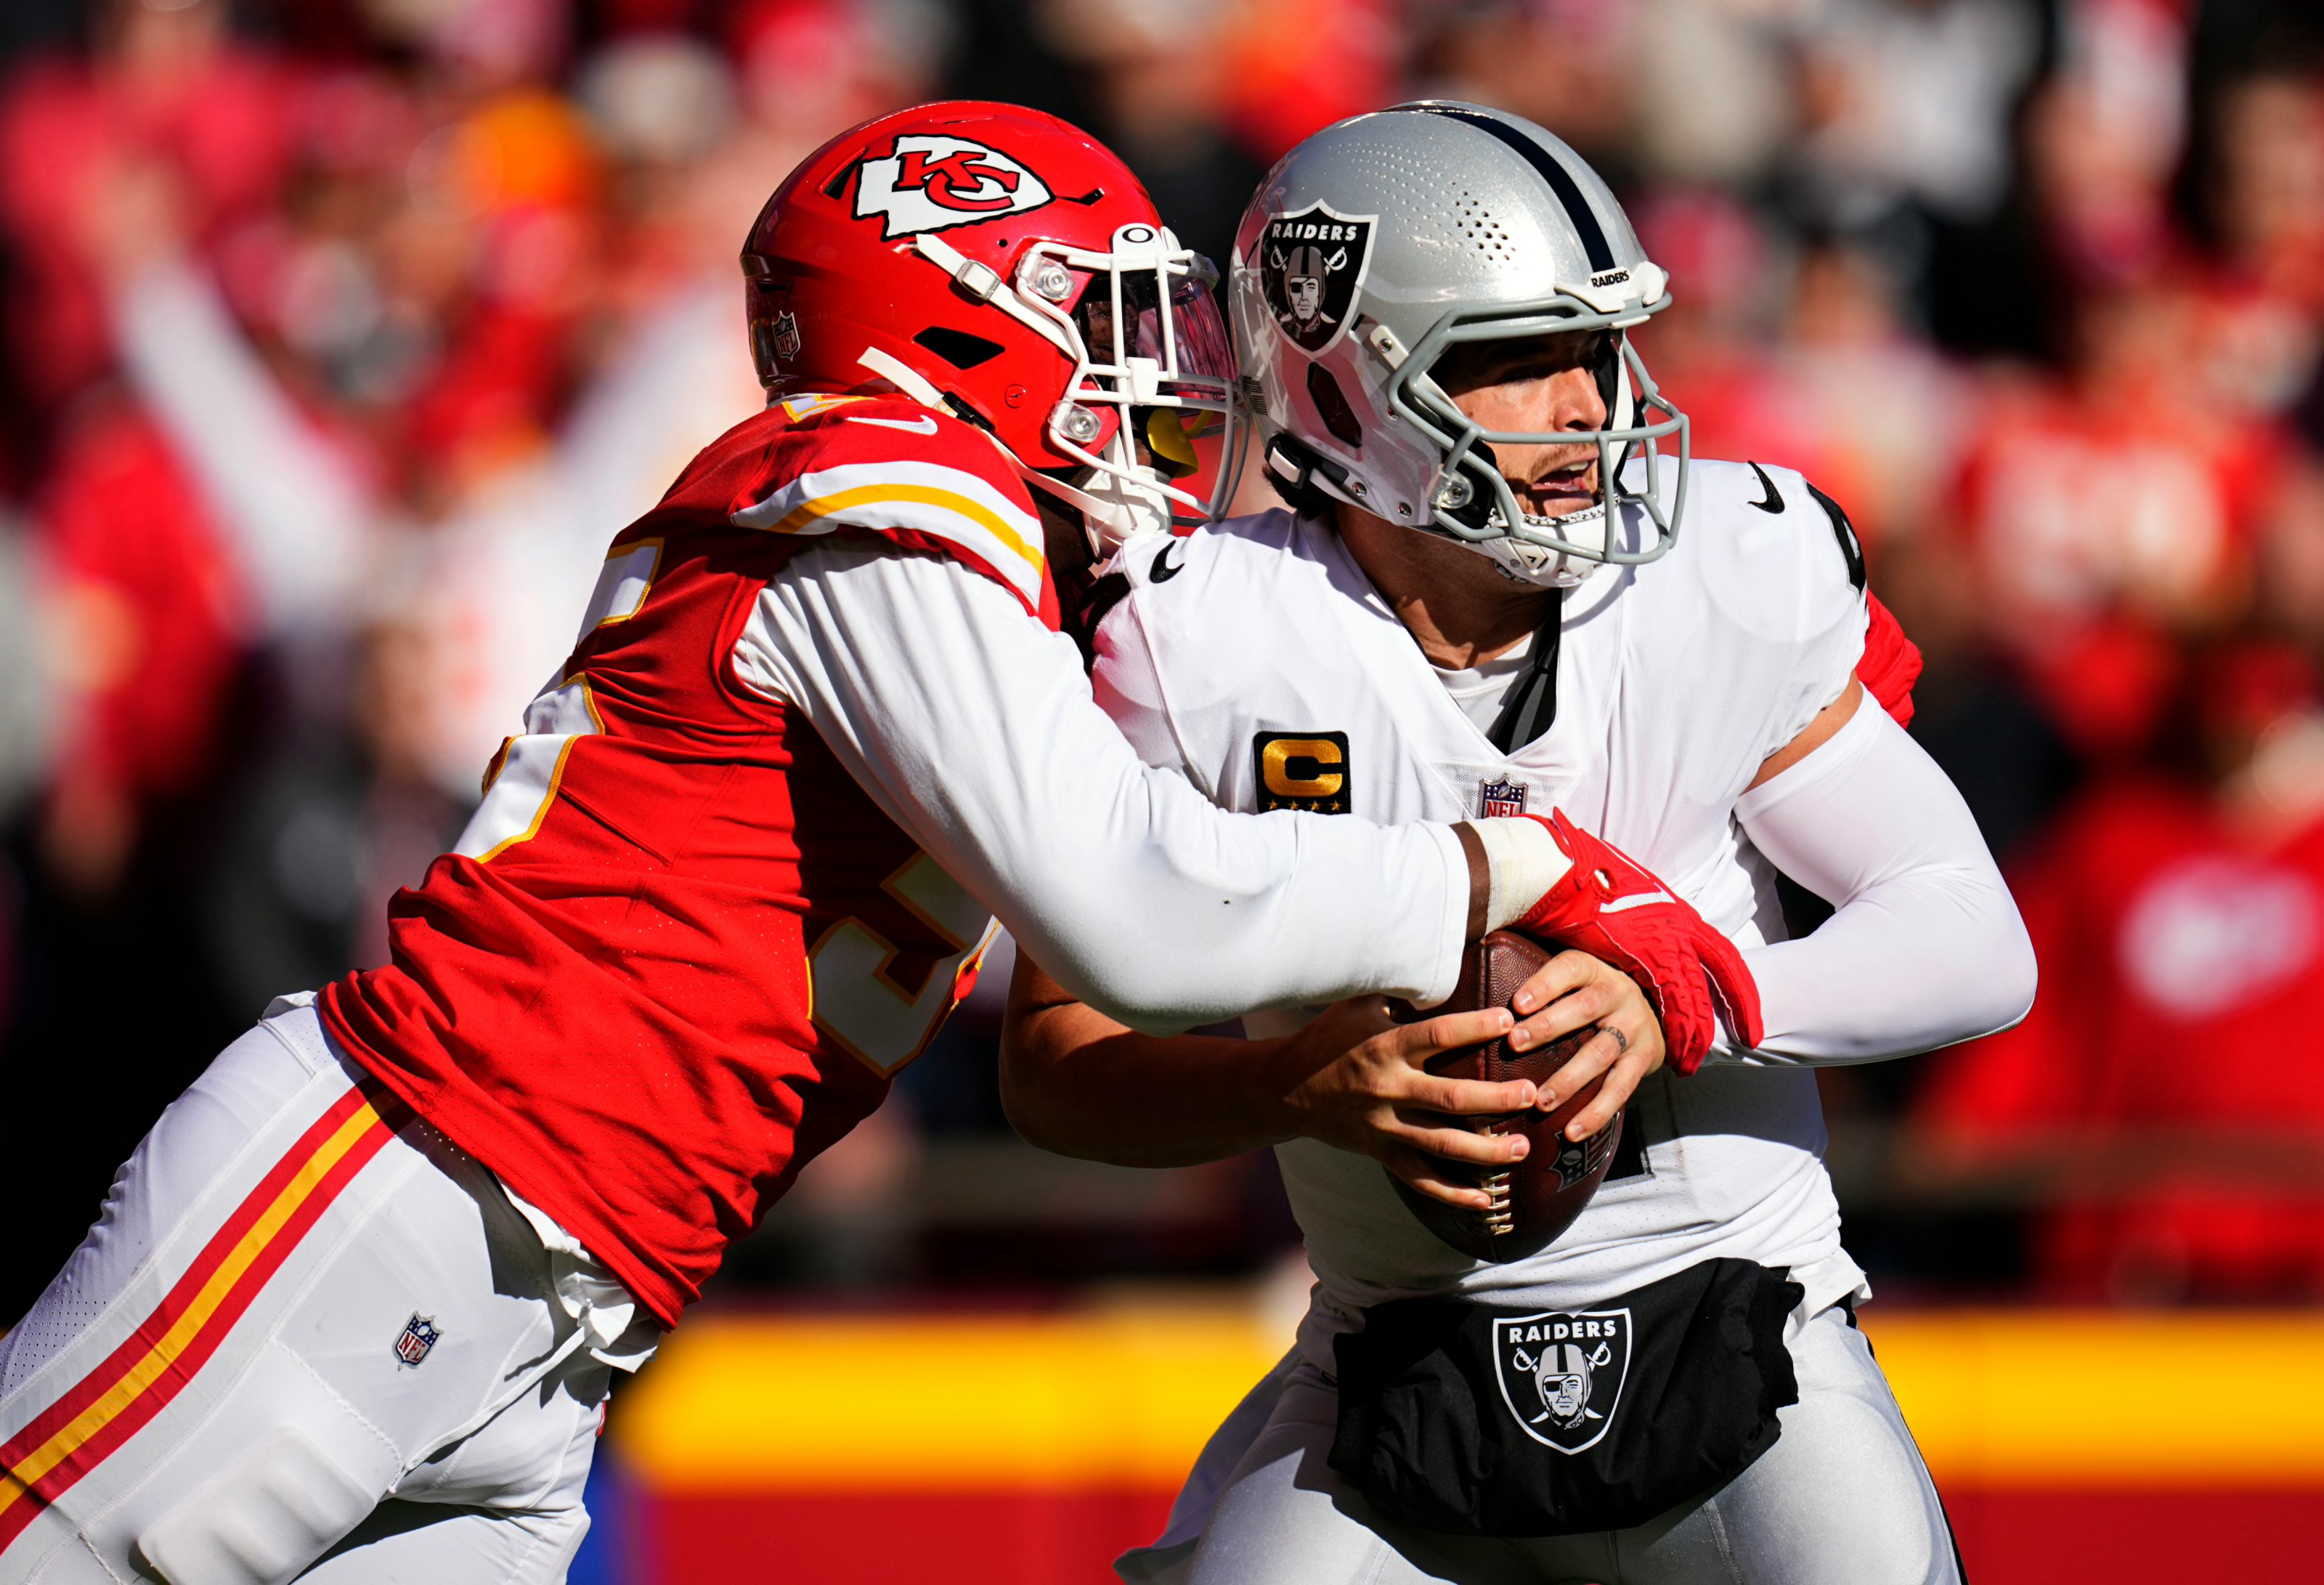 KC Chiefs vs. Raiders recap Seven crucial takeaways from a dominant